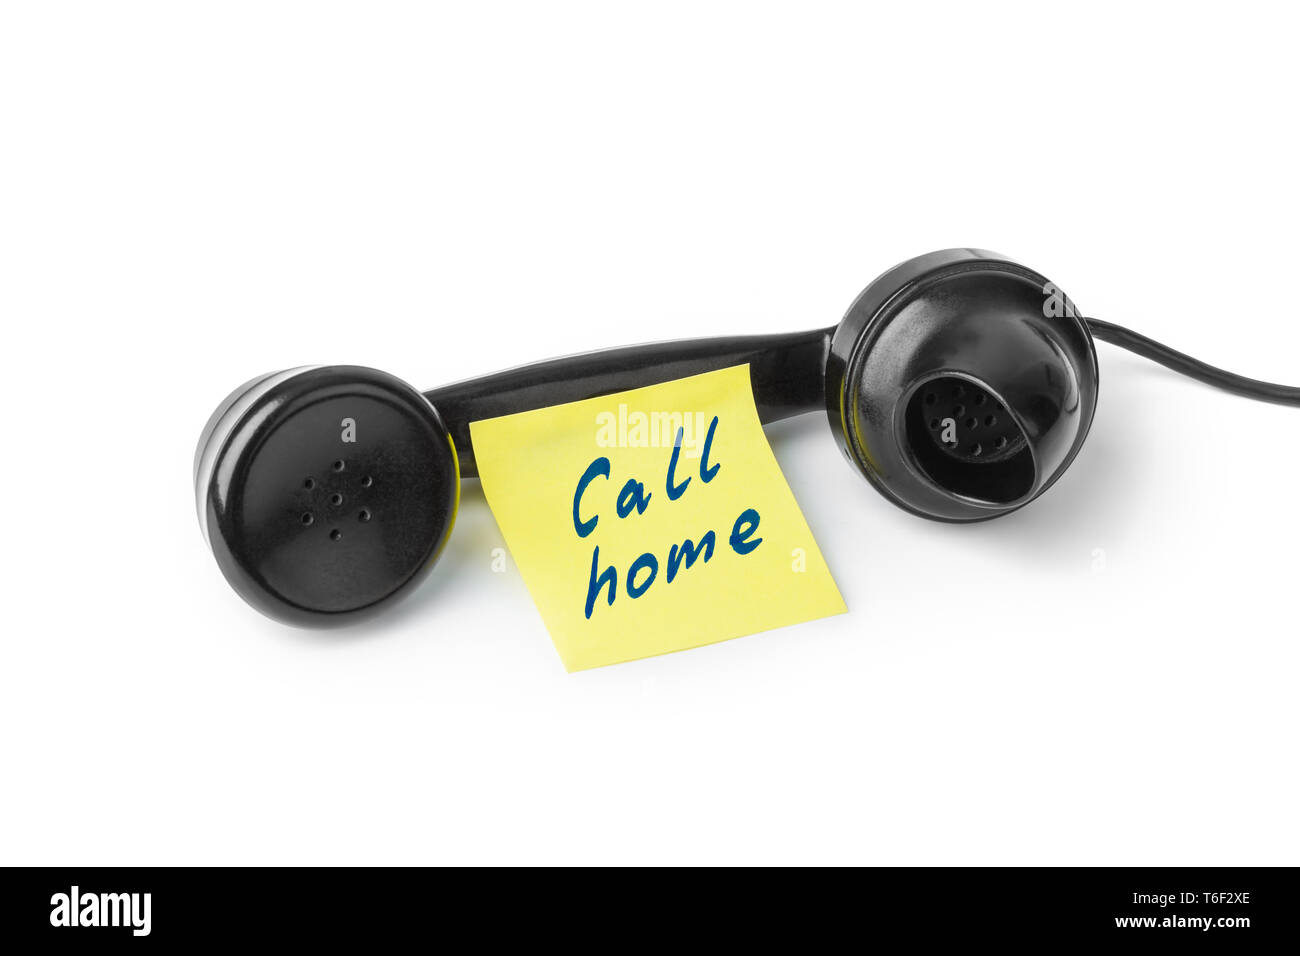 Vintage telephone and paper Call home Stock Photo